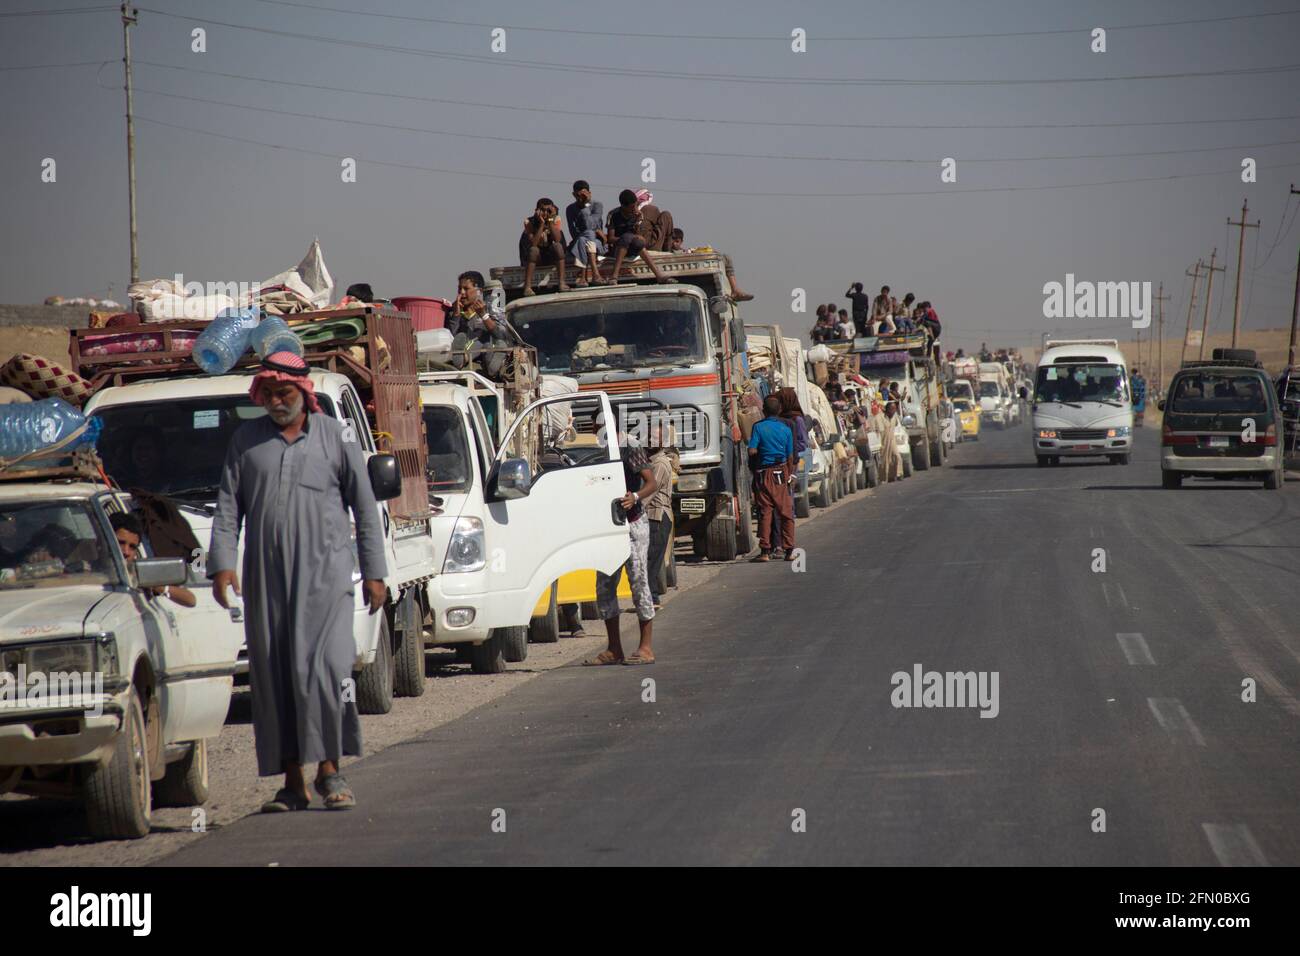 Mosul, Iraq. 9th Jun 2017 A long line of cars wait alongside the road leading out of Mosul. Stock Photo